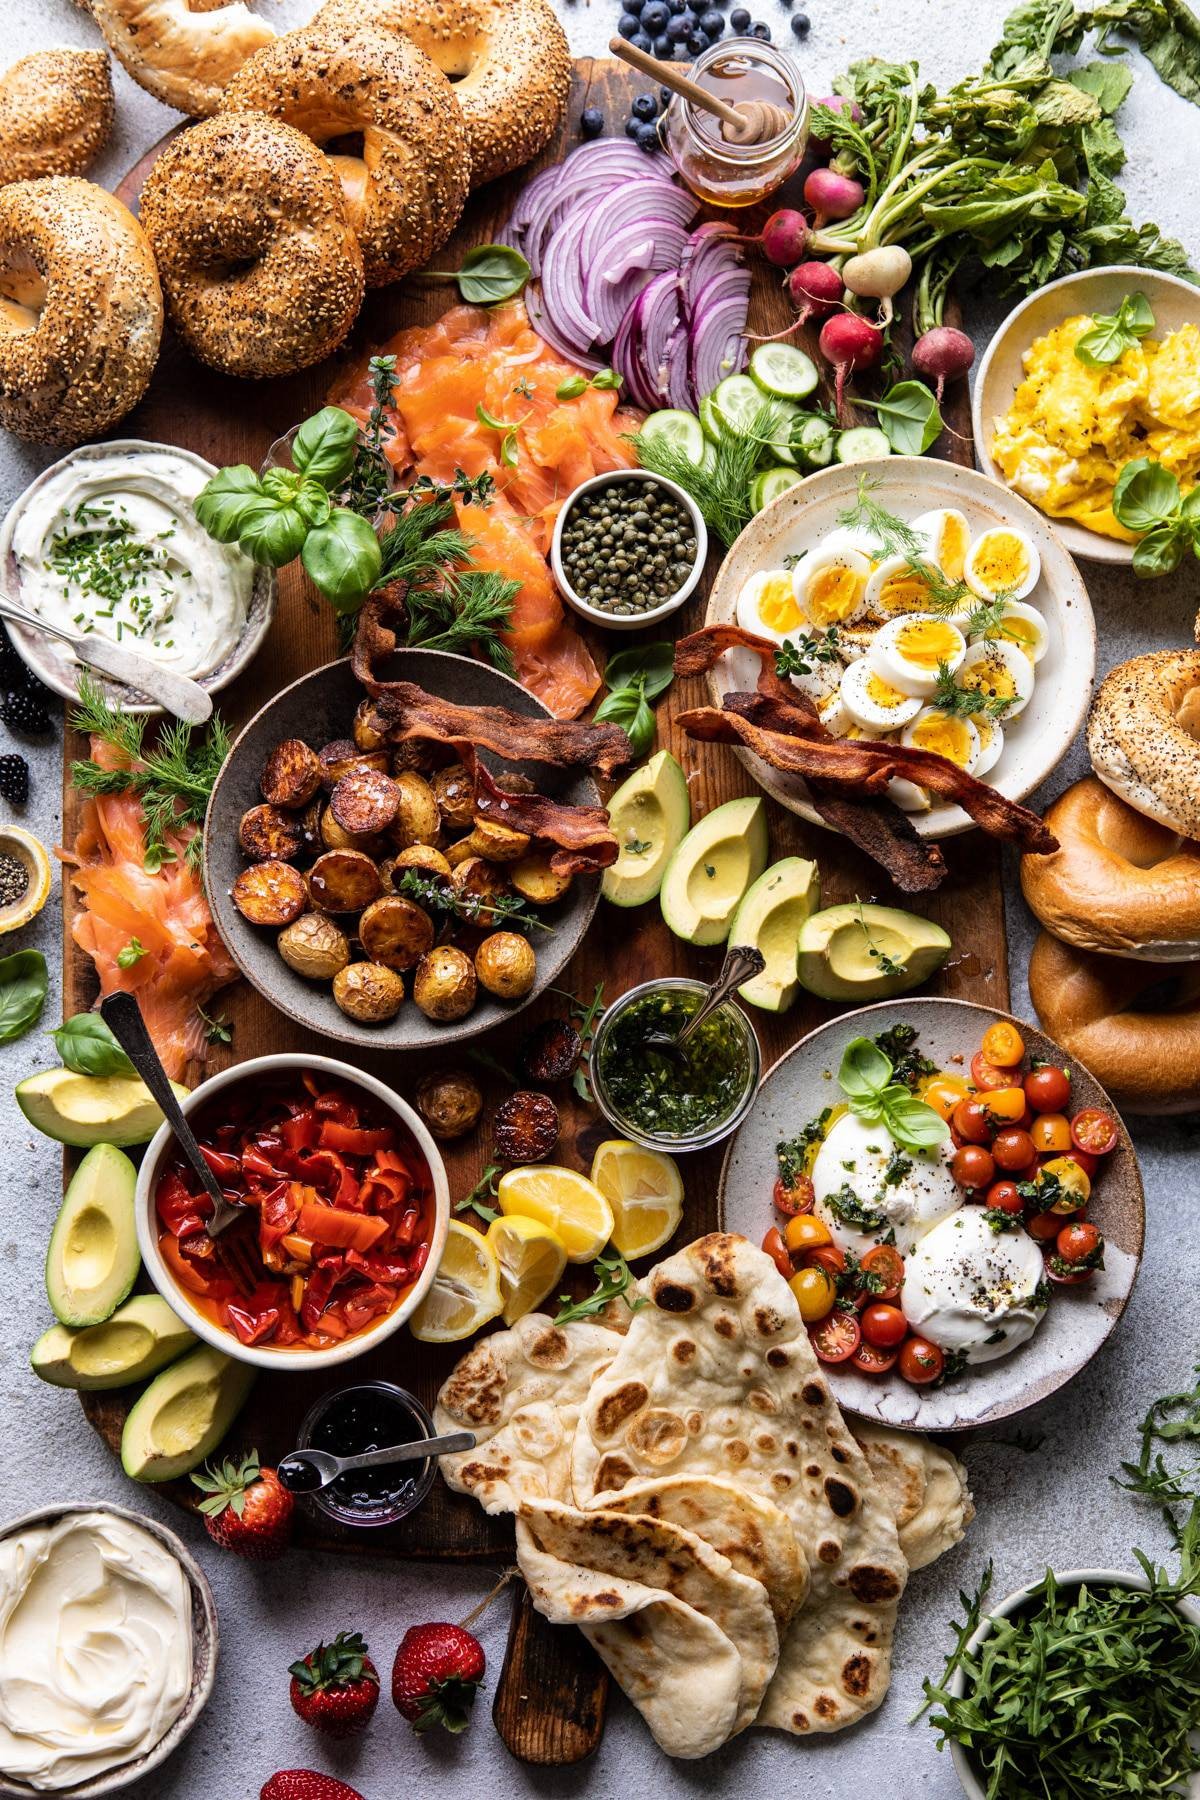 Set and stage the best Easter brunch by laying every treat out on a board, charcuterie-style. Everyone can pick what they want for themselves. Dig in! (via Half Baked Harvest)